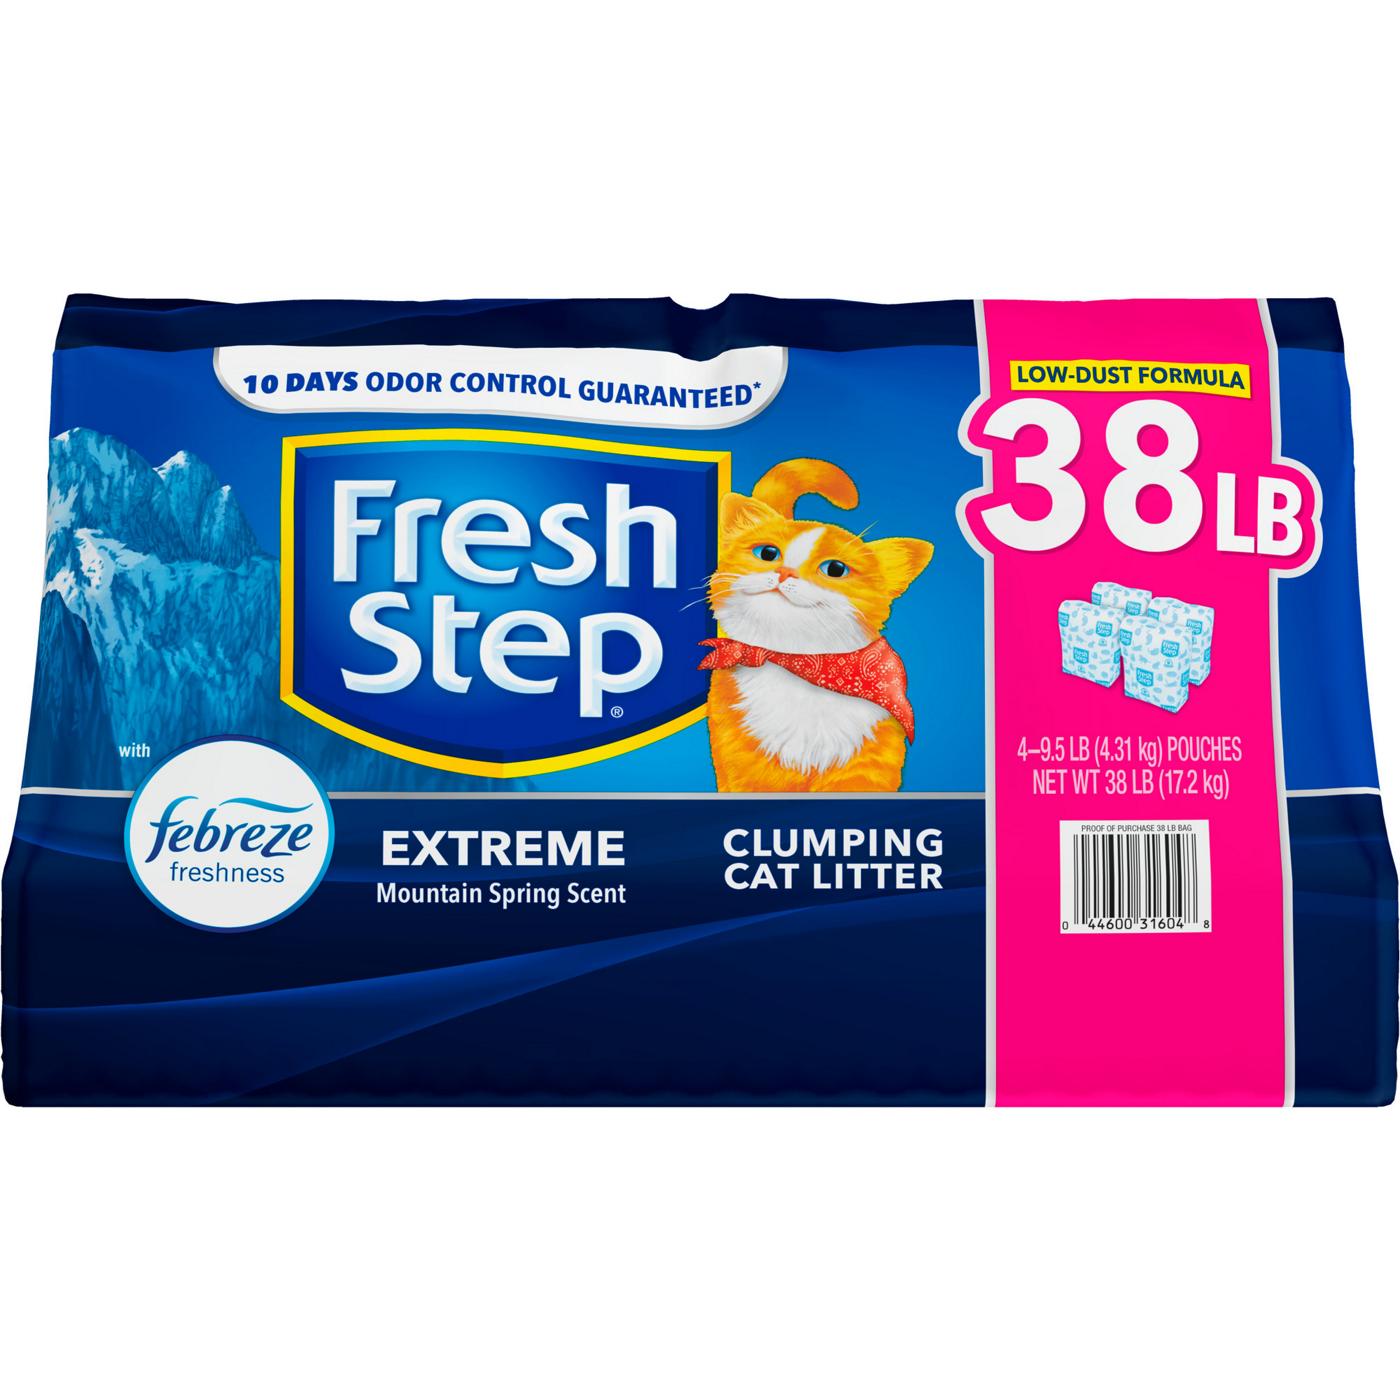 Fresh Step Extreme Odor Control with Febreze Clumping Cat Litter; image 1 of 4